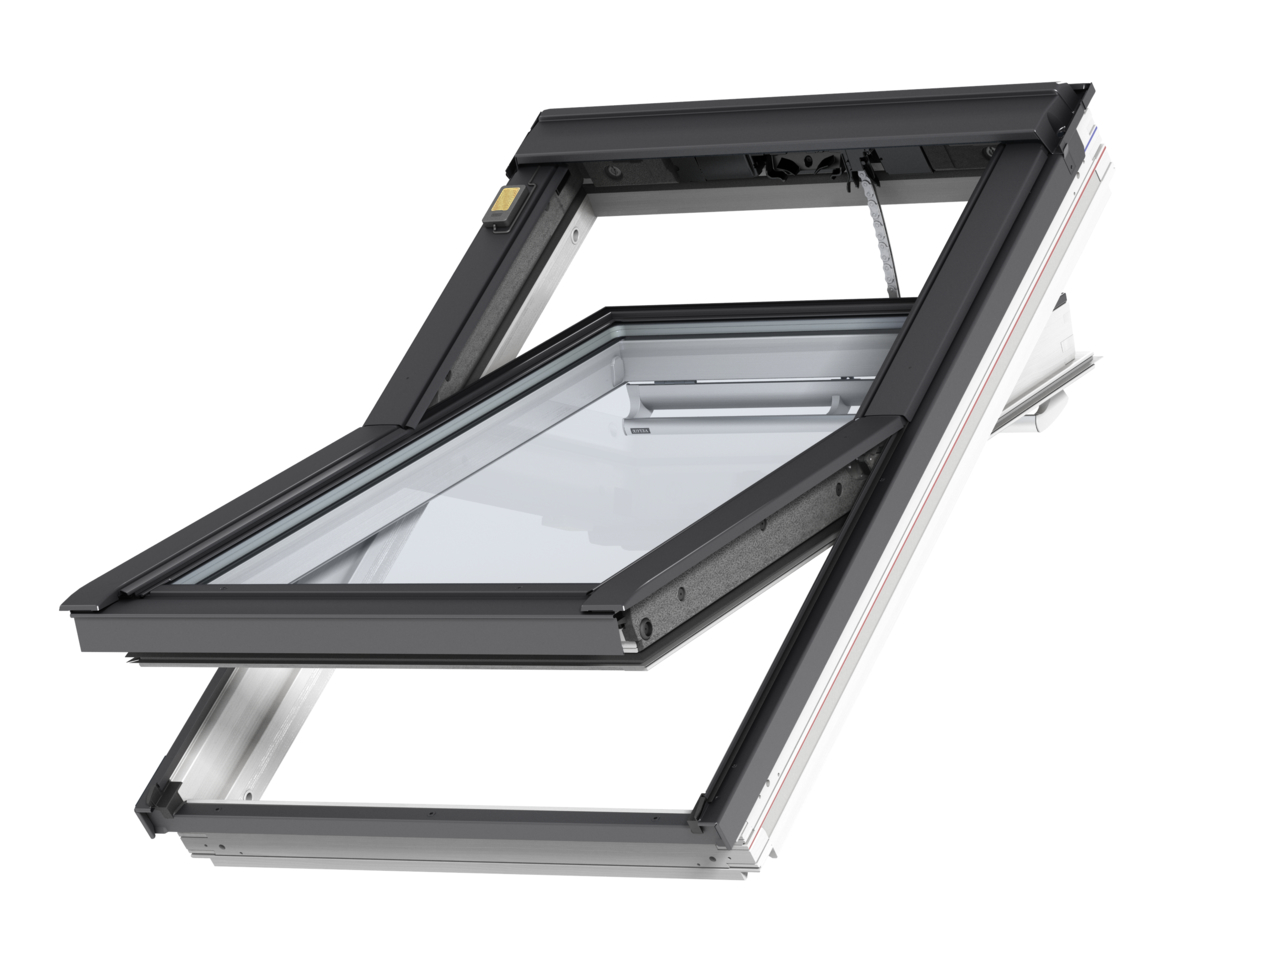 Velux GGL Integra High Thermal Triple Glazed Acrylic Coated Centre Pivot Pitched Roof Window